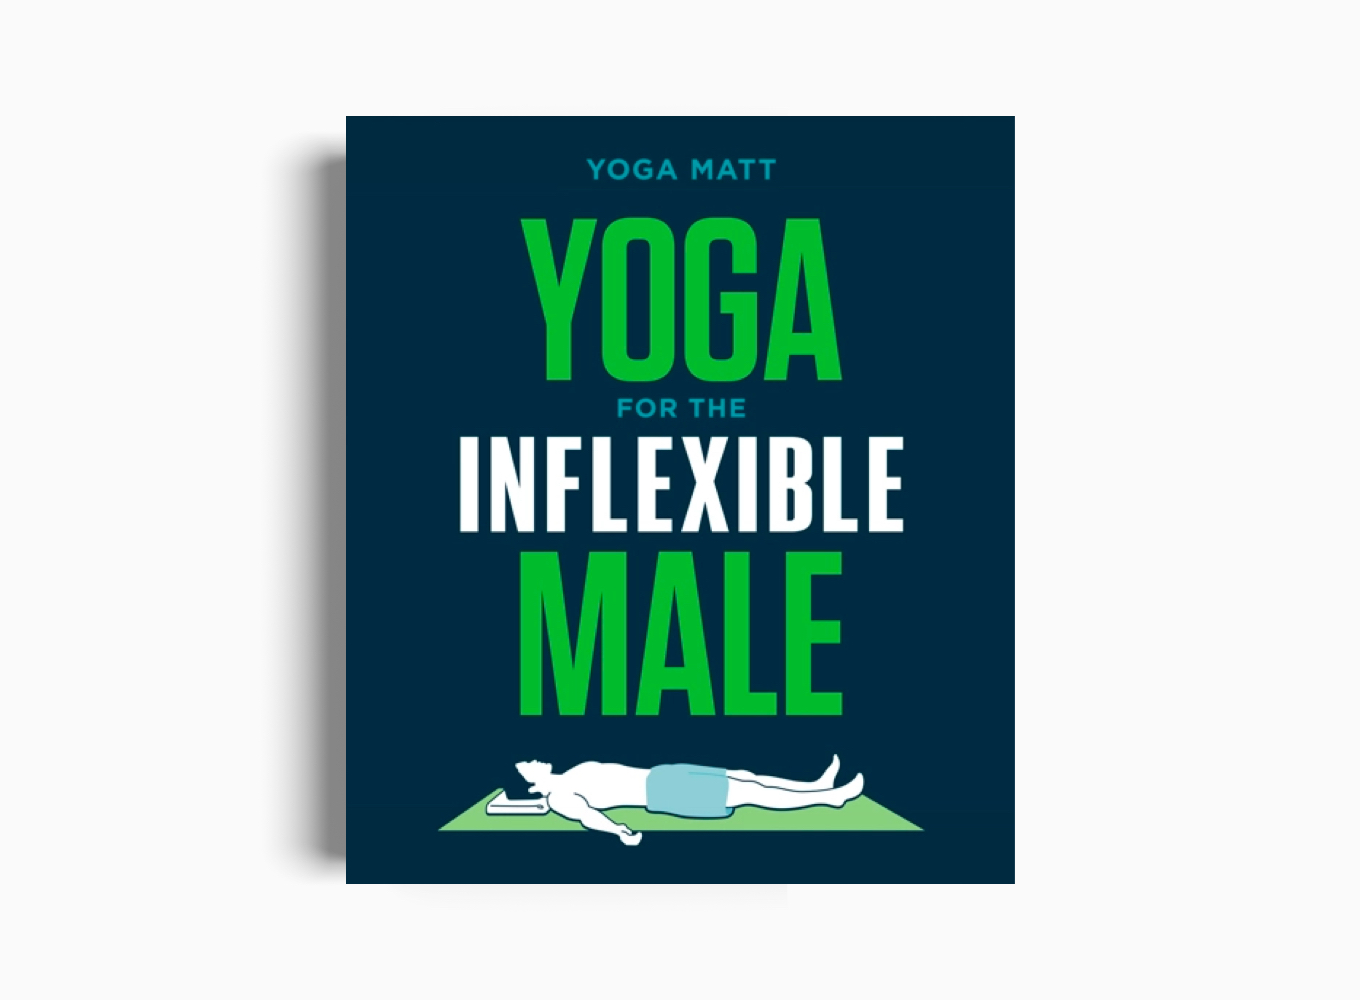 YOGA FOR THE INFLEXIBLE MALE